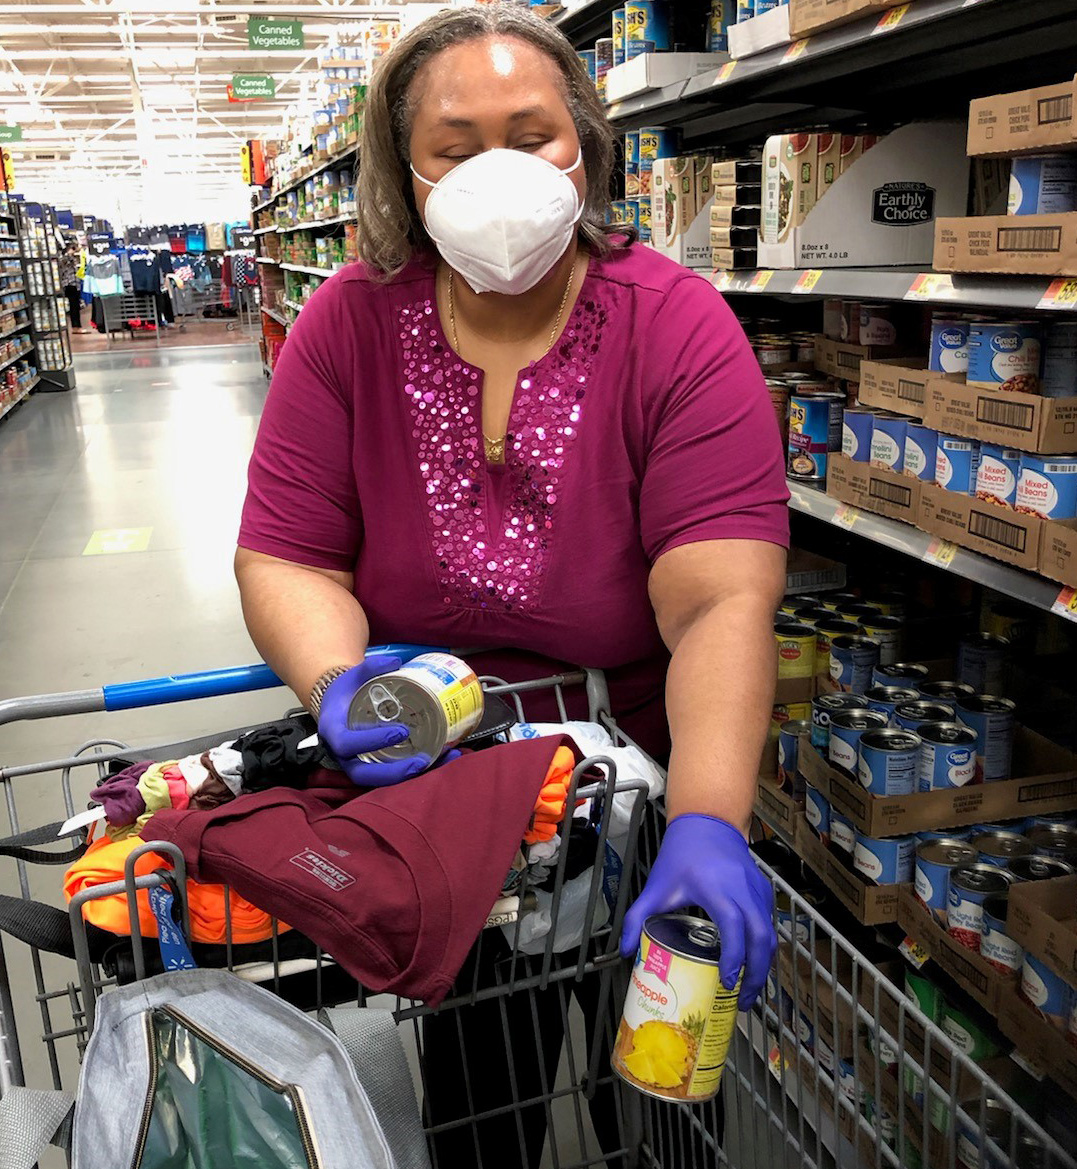 A middle-aged Black woman wearing a mask and nitrile gloves shops for groceries. She is placing a can in a shopping cart. 